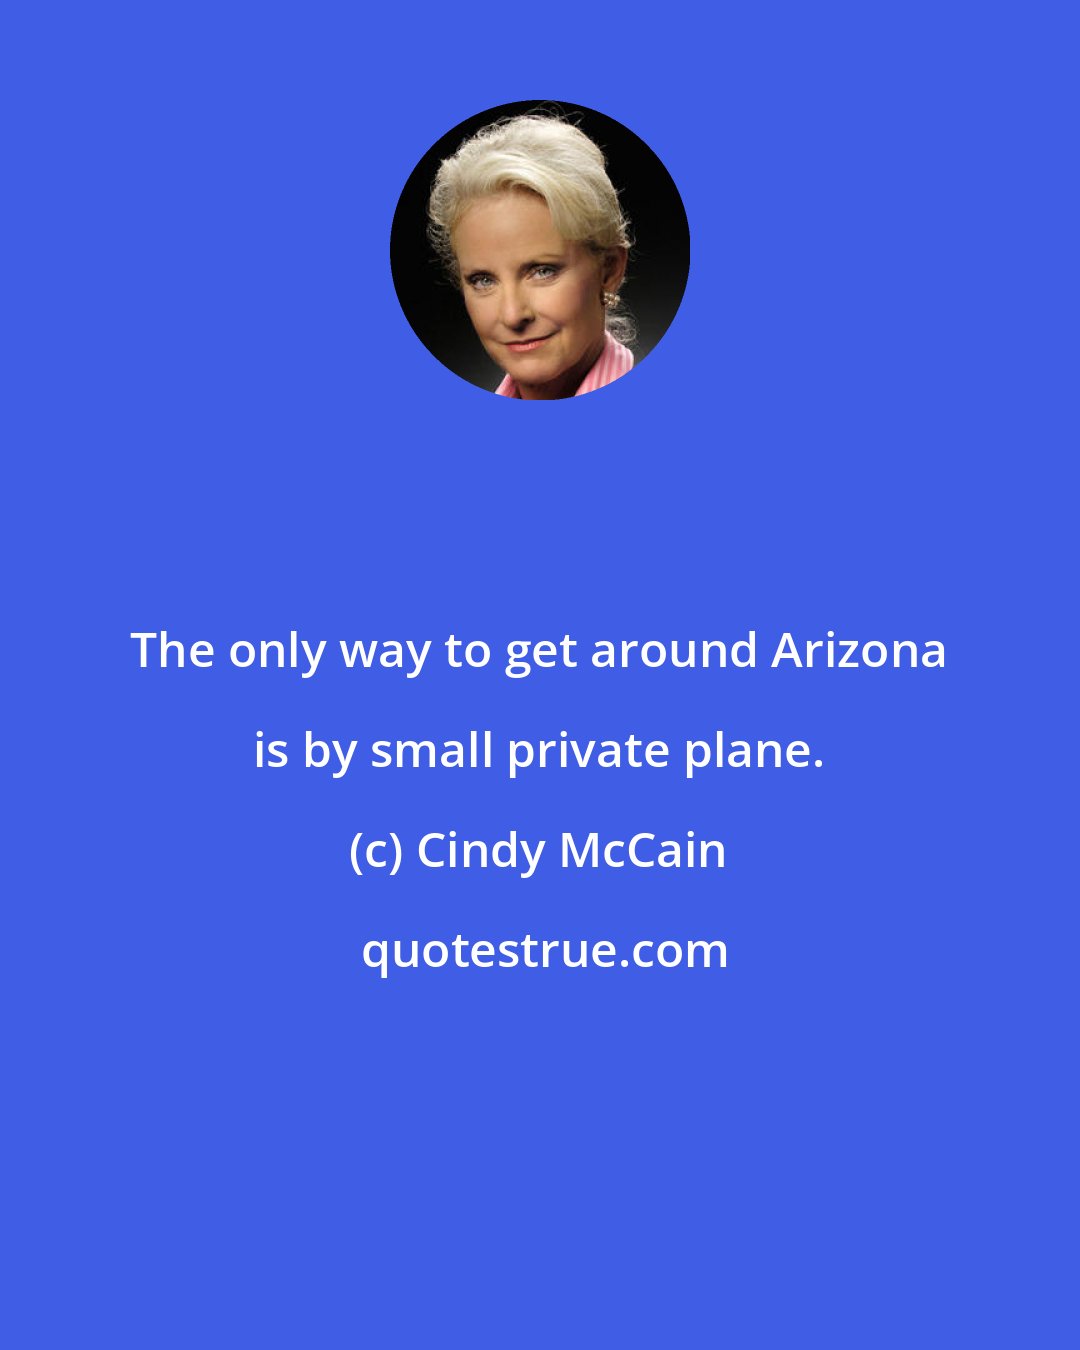 Cindy McCain: The only way to get around Arizona is by small private plane.